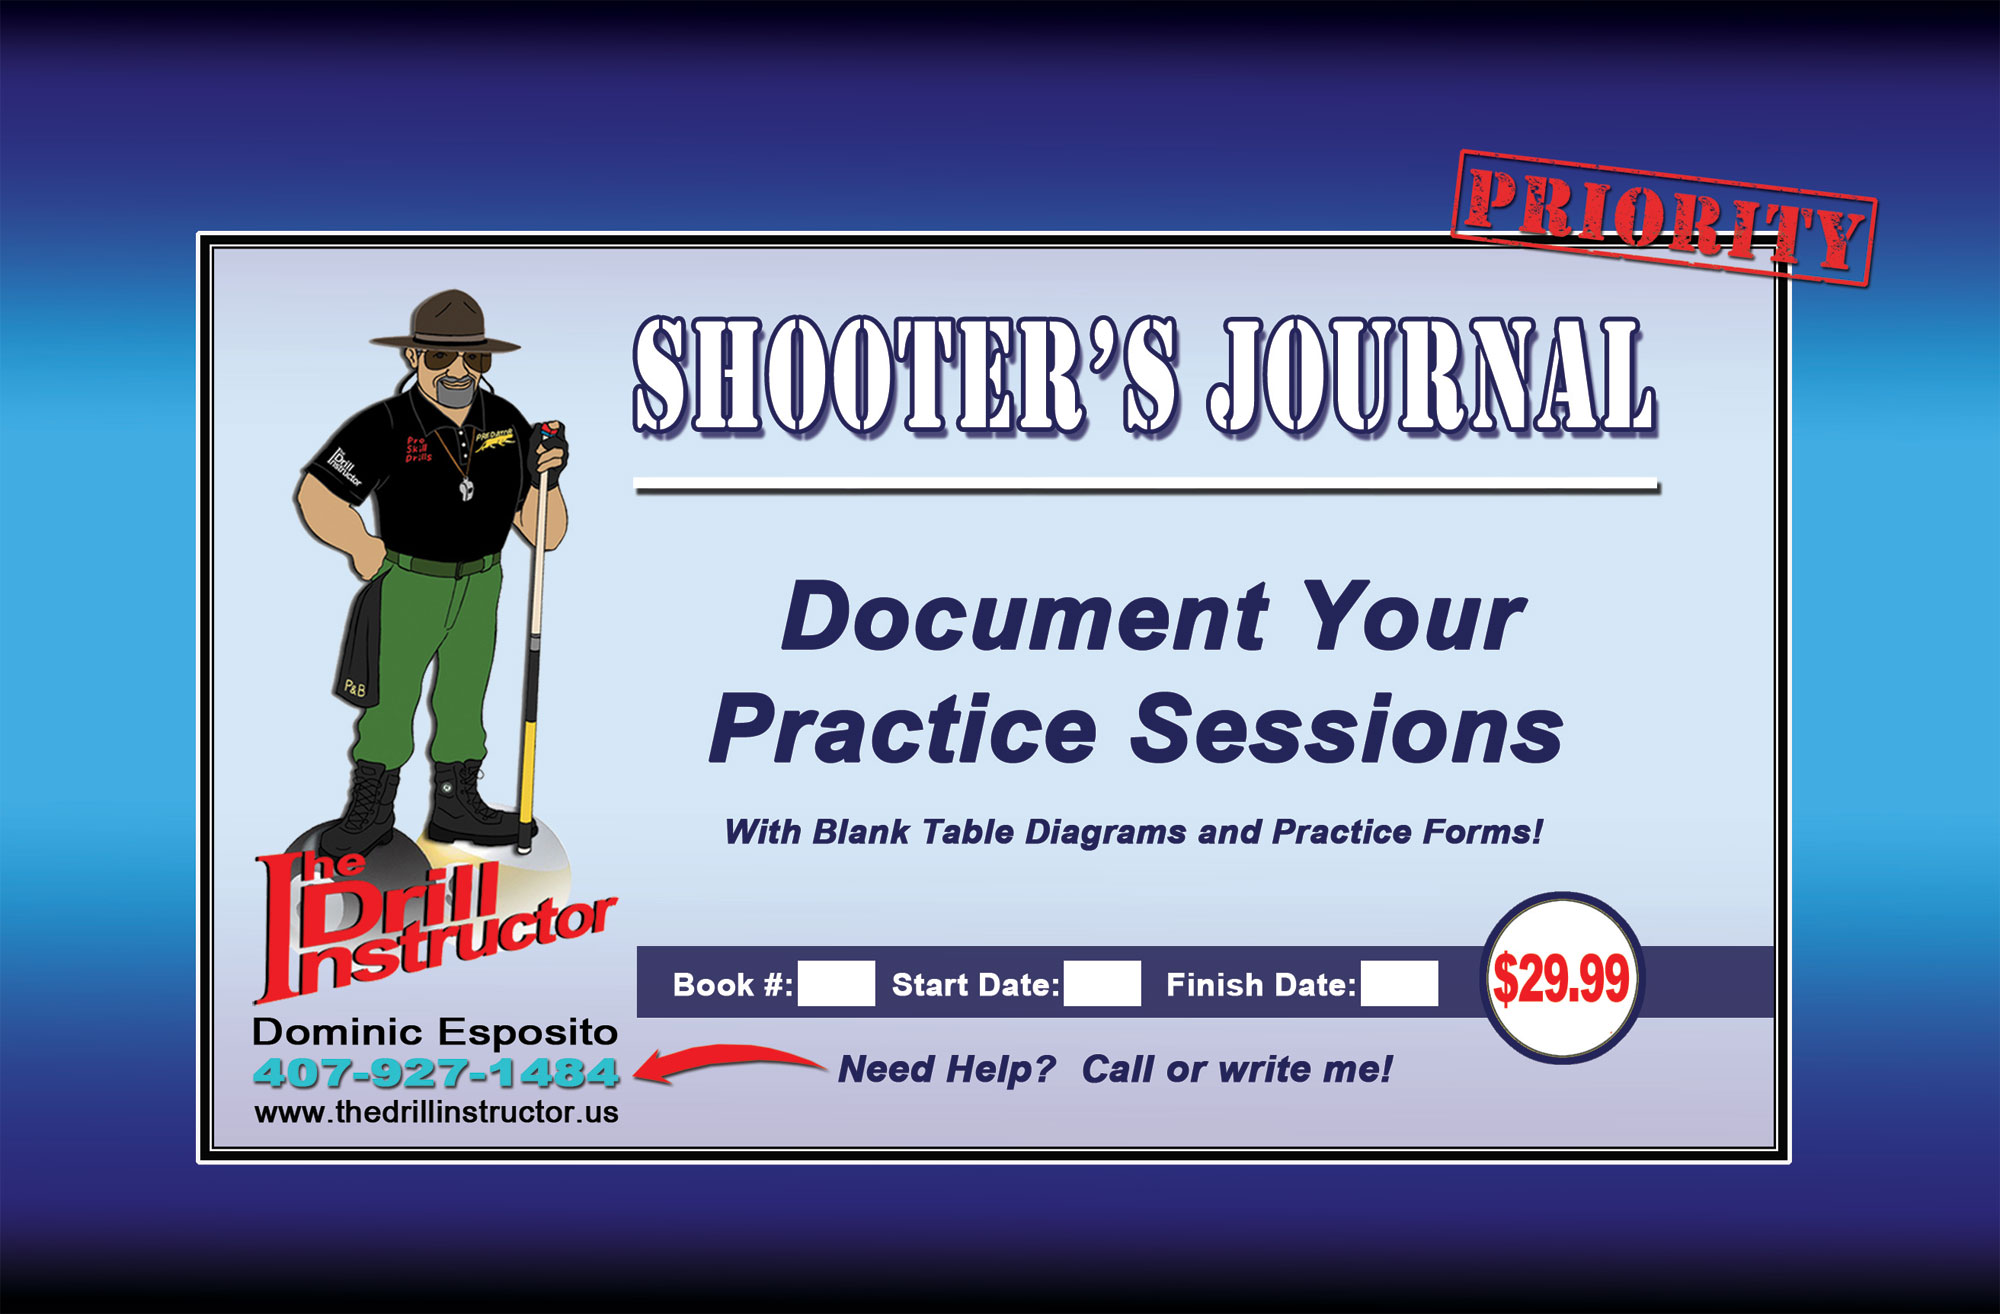 Drill Instructor- Shooters Journal Pool Cue